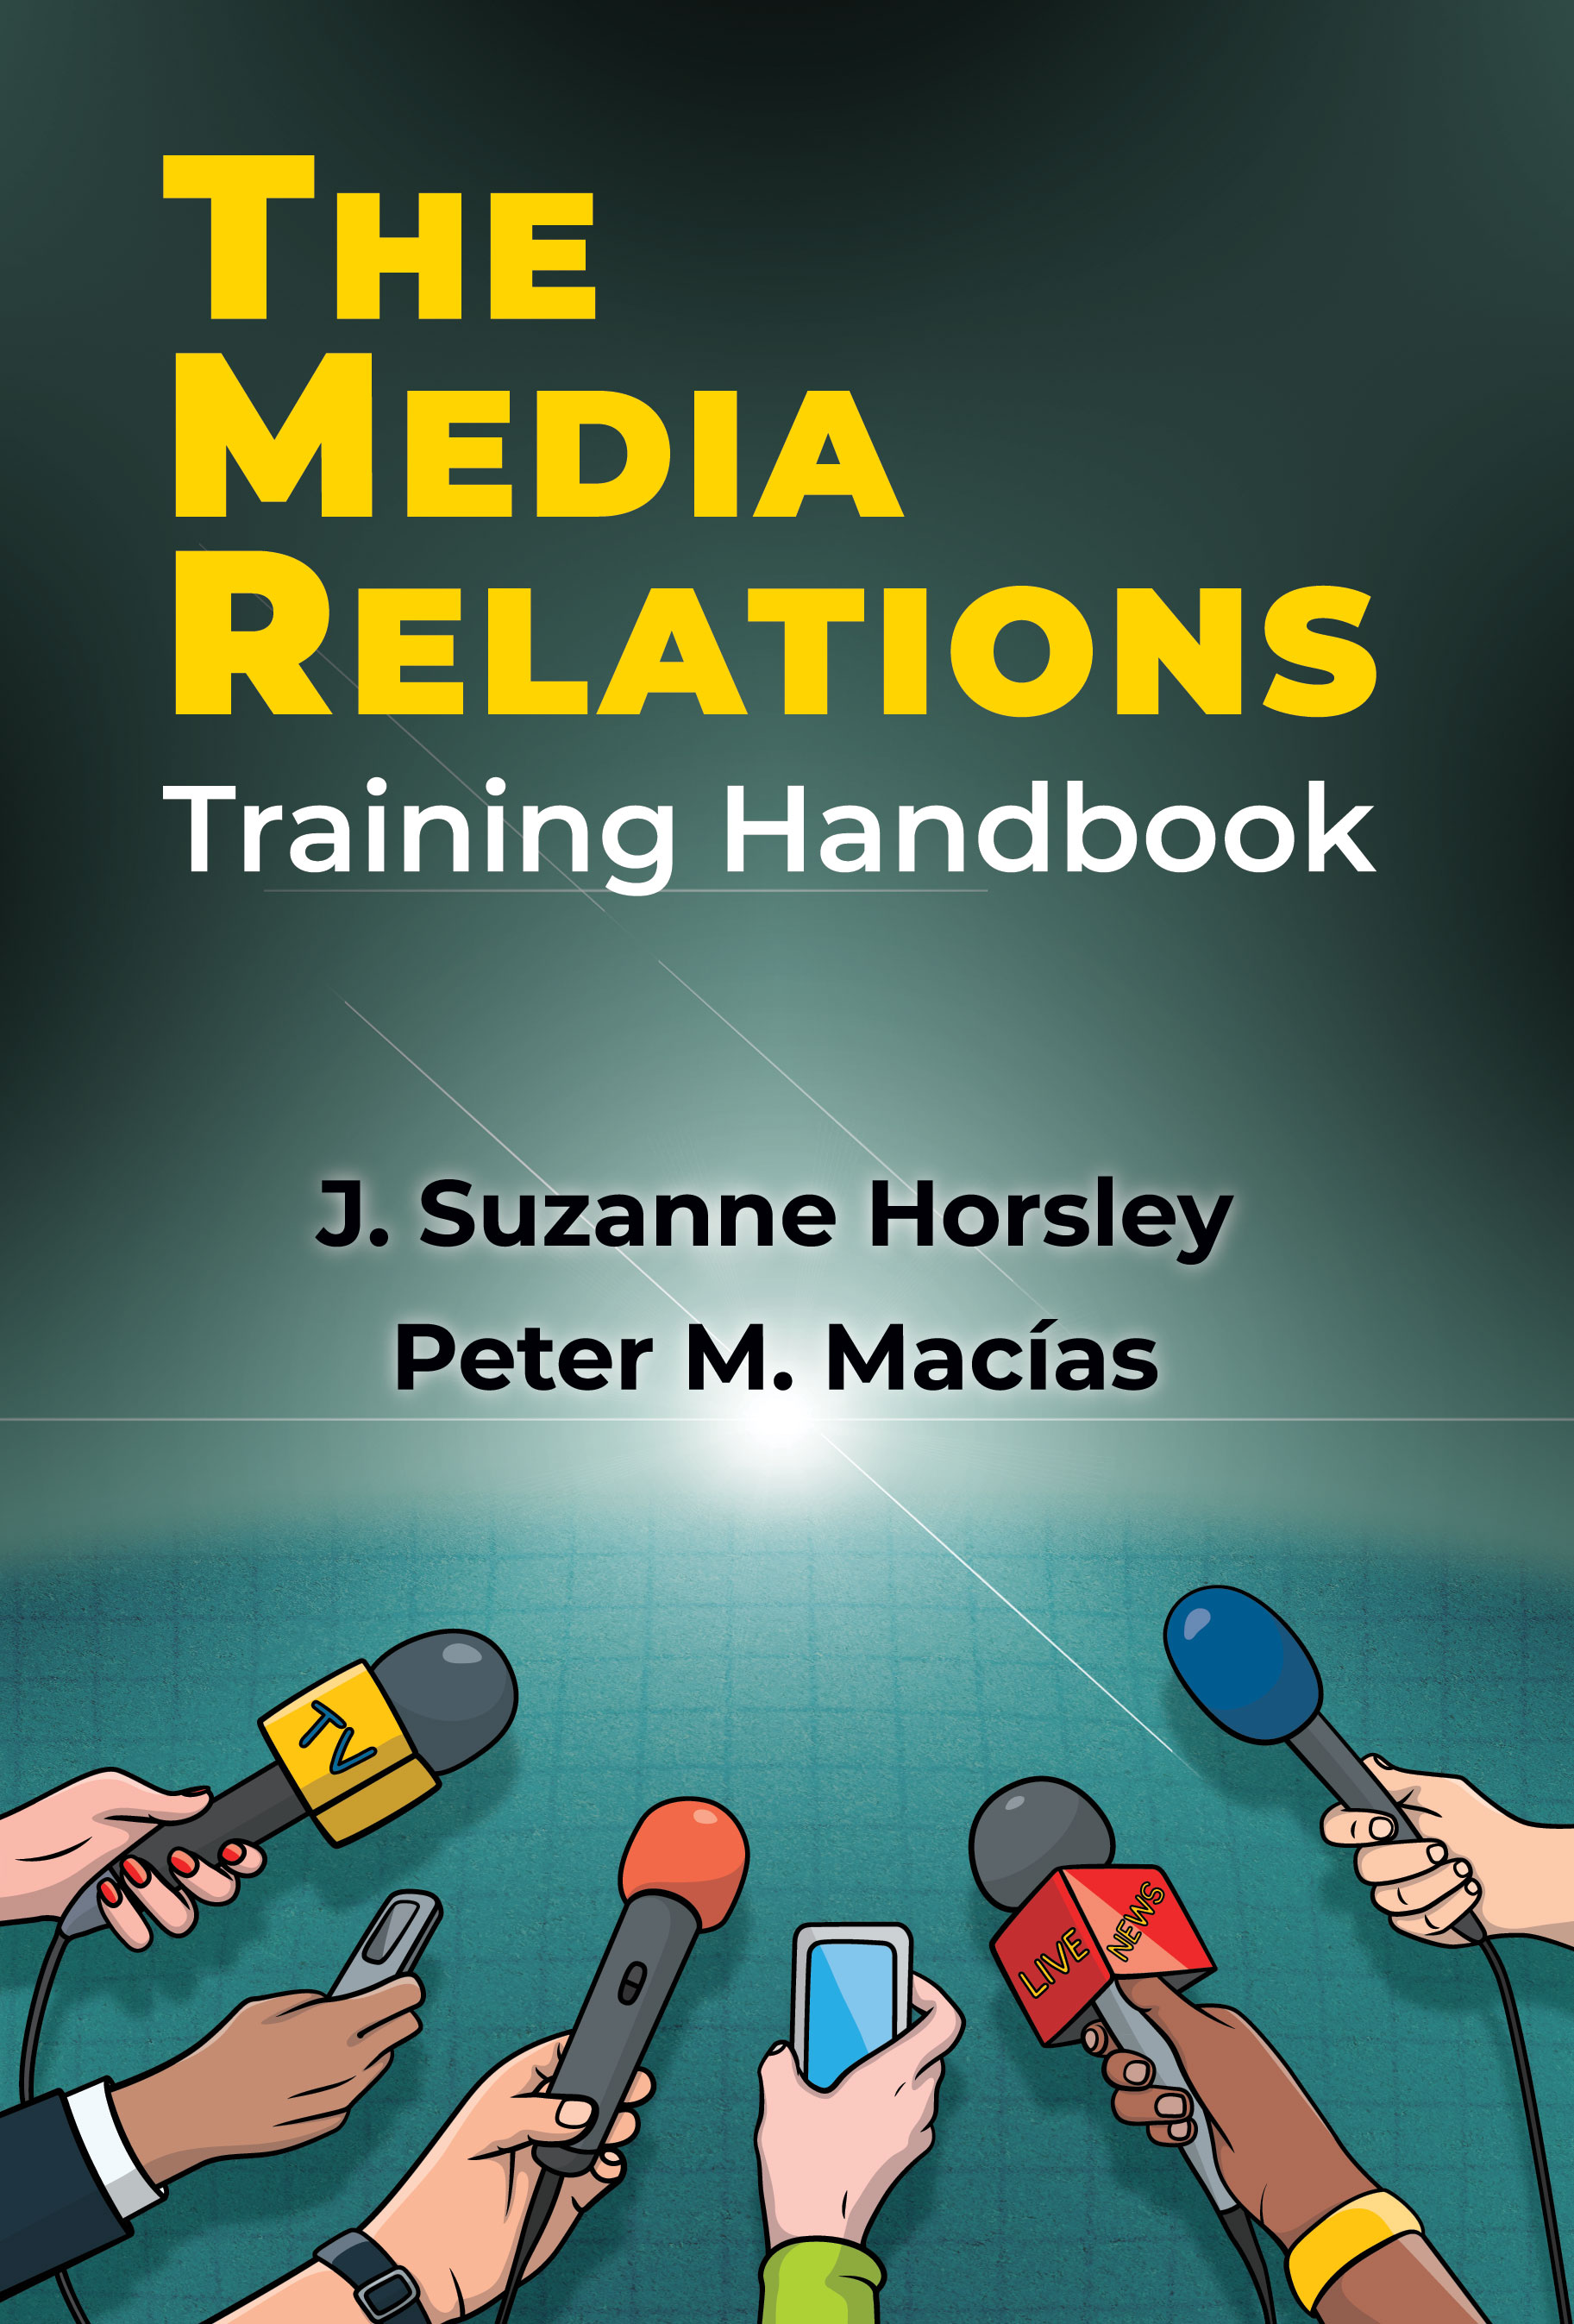 The Media Relations Training Handbook:  by J. Suzanne Horsley, Peter M. Macías